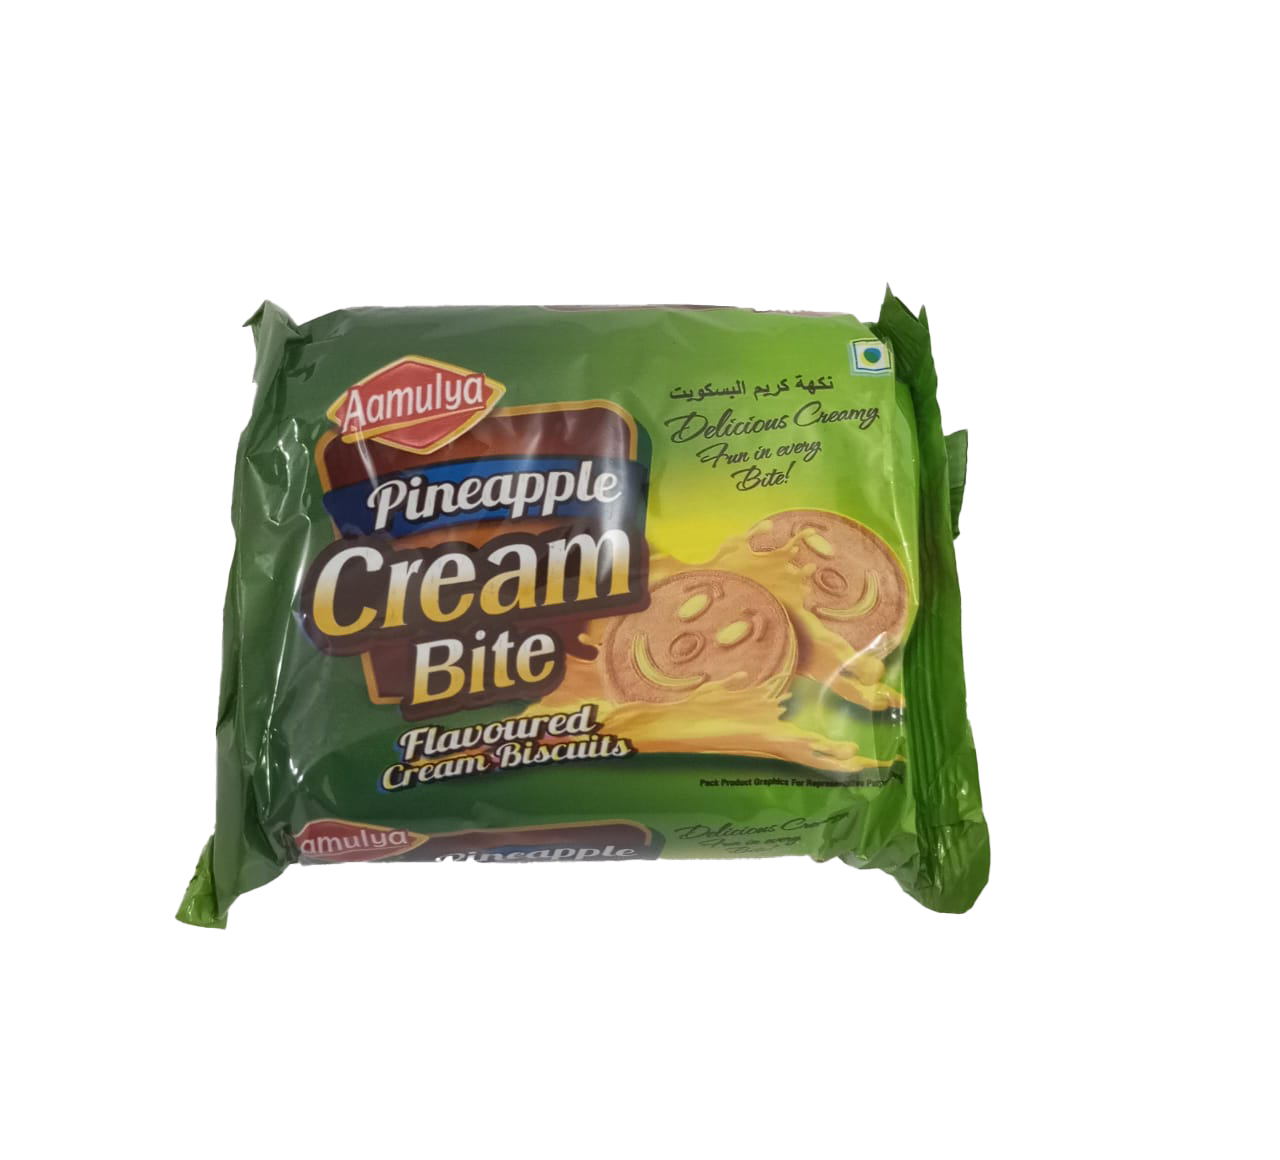 Aamulya Pineapple Cream Bite Flavoured Cream Biscuits, Green, 92g |GMP30a